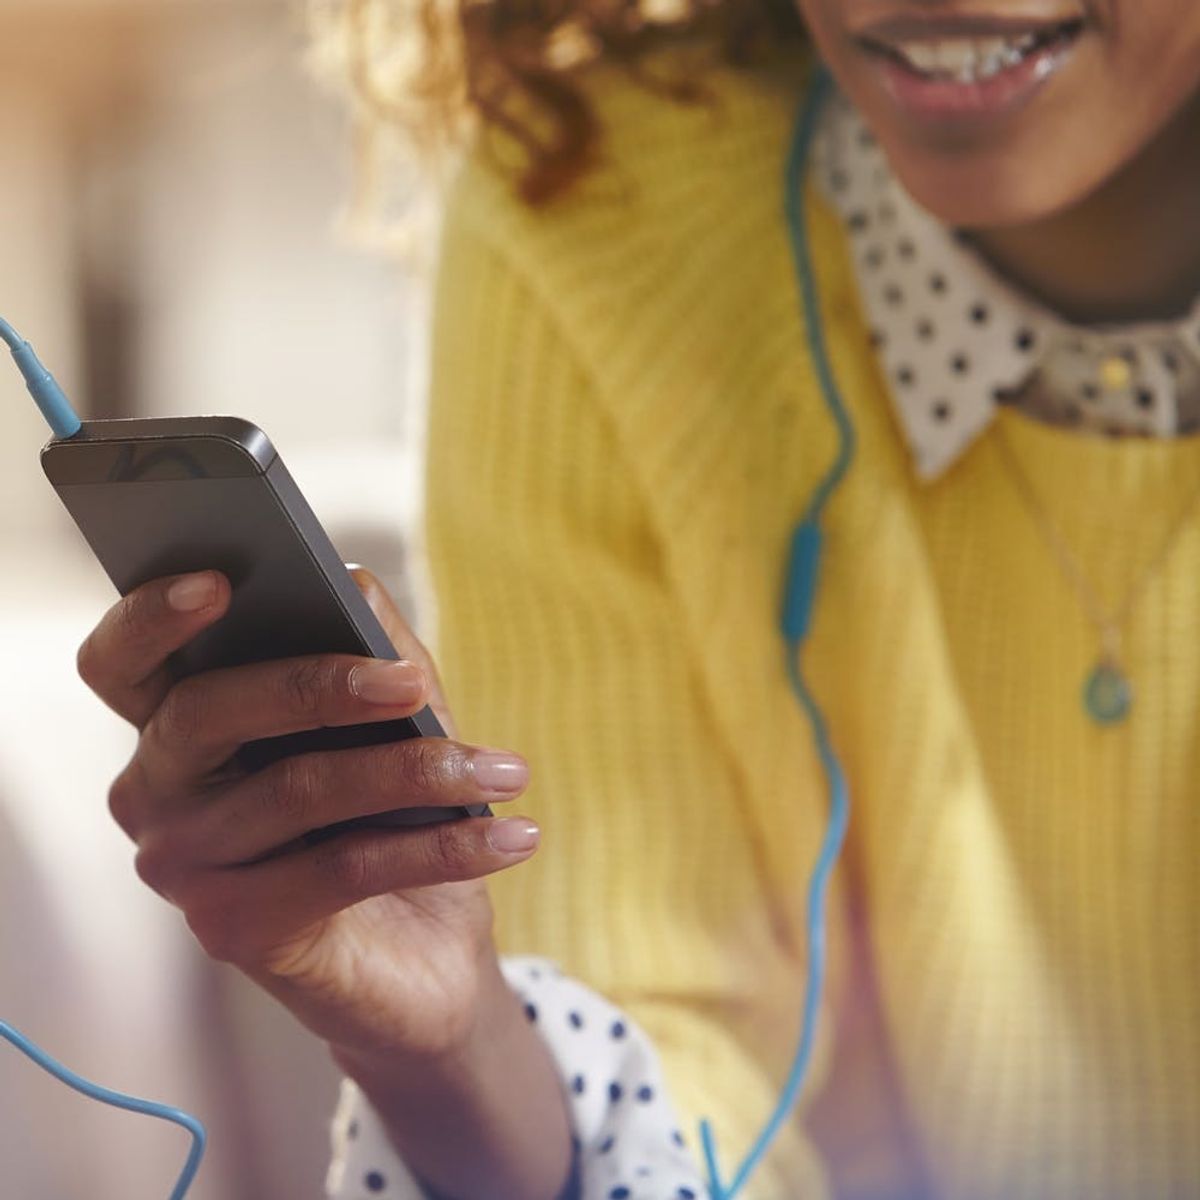 9 New Podcasts That Will Be Your Next Obsession